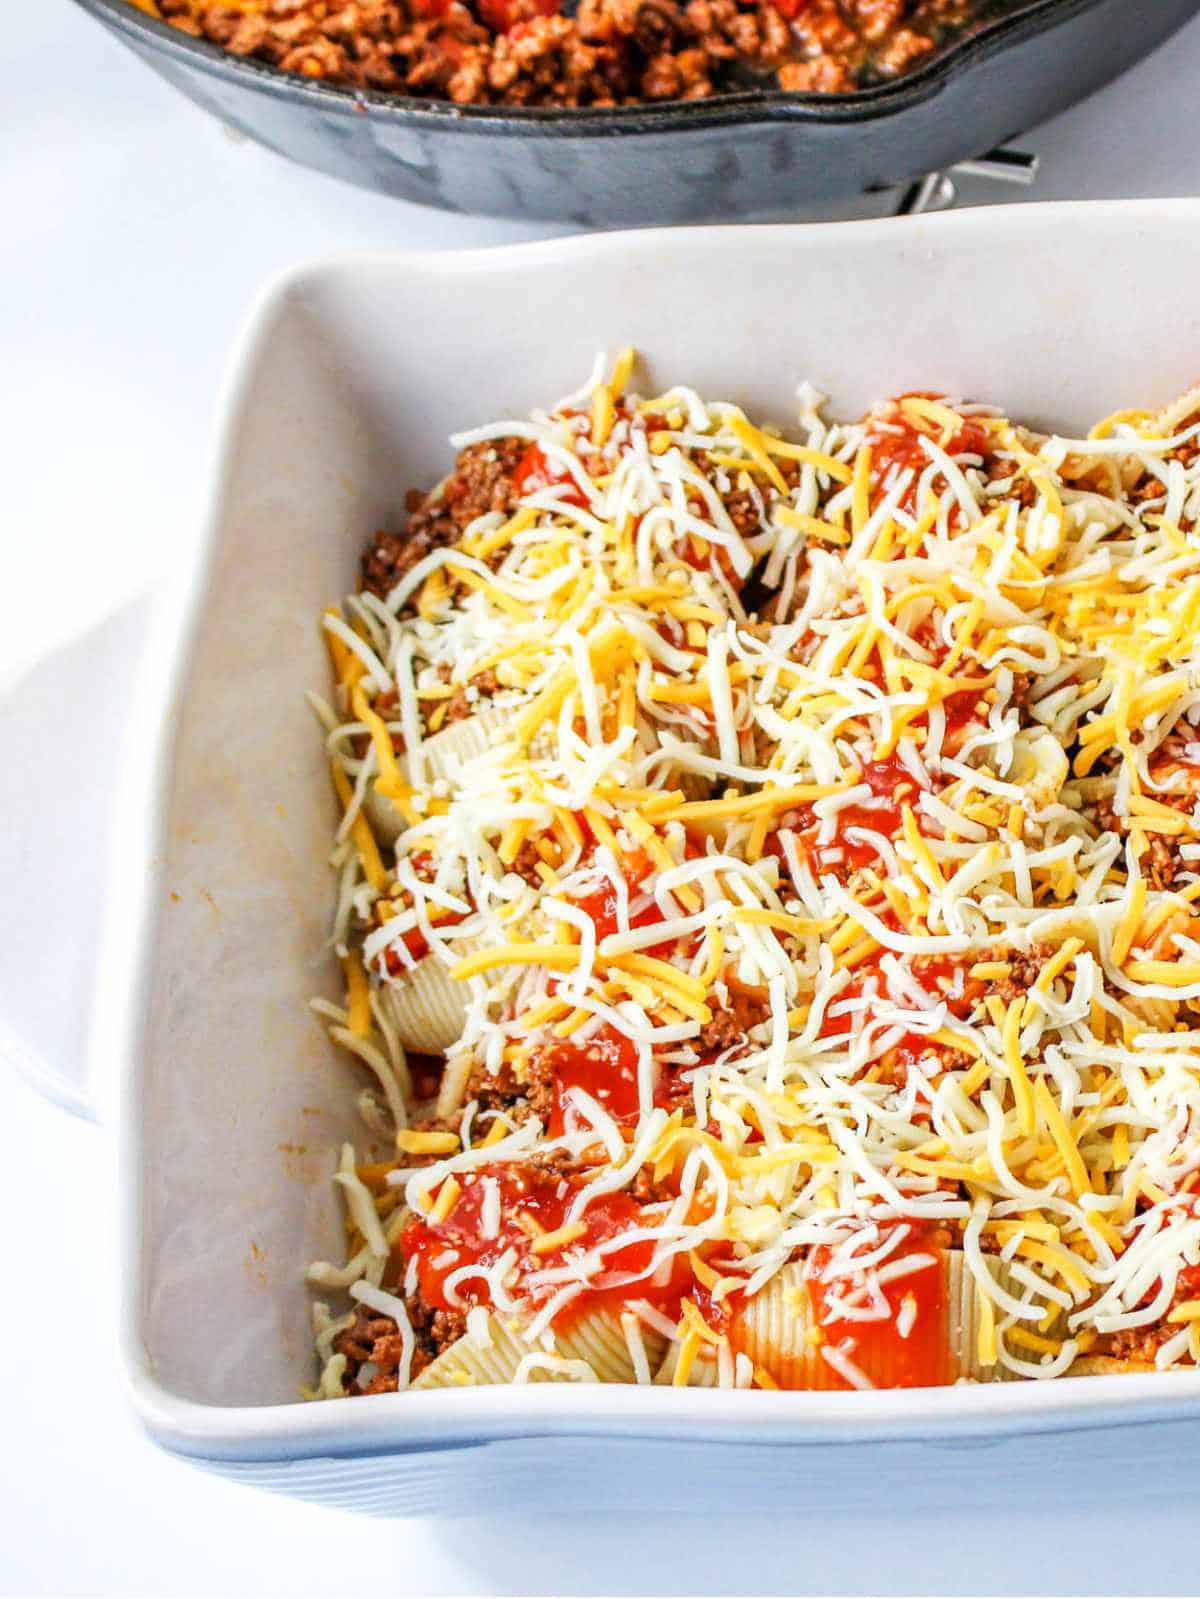 sauce and shredded cheese topped casserole.